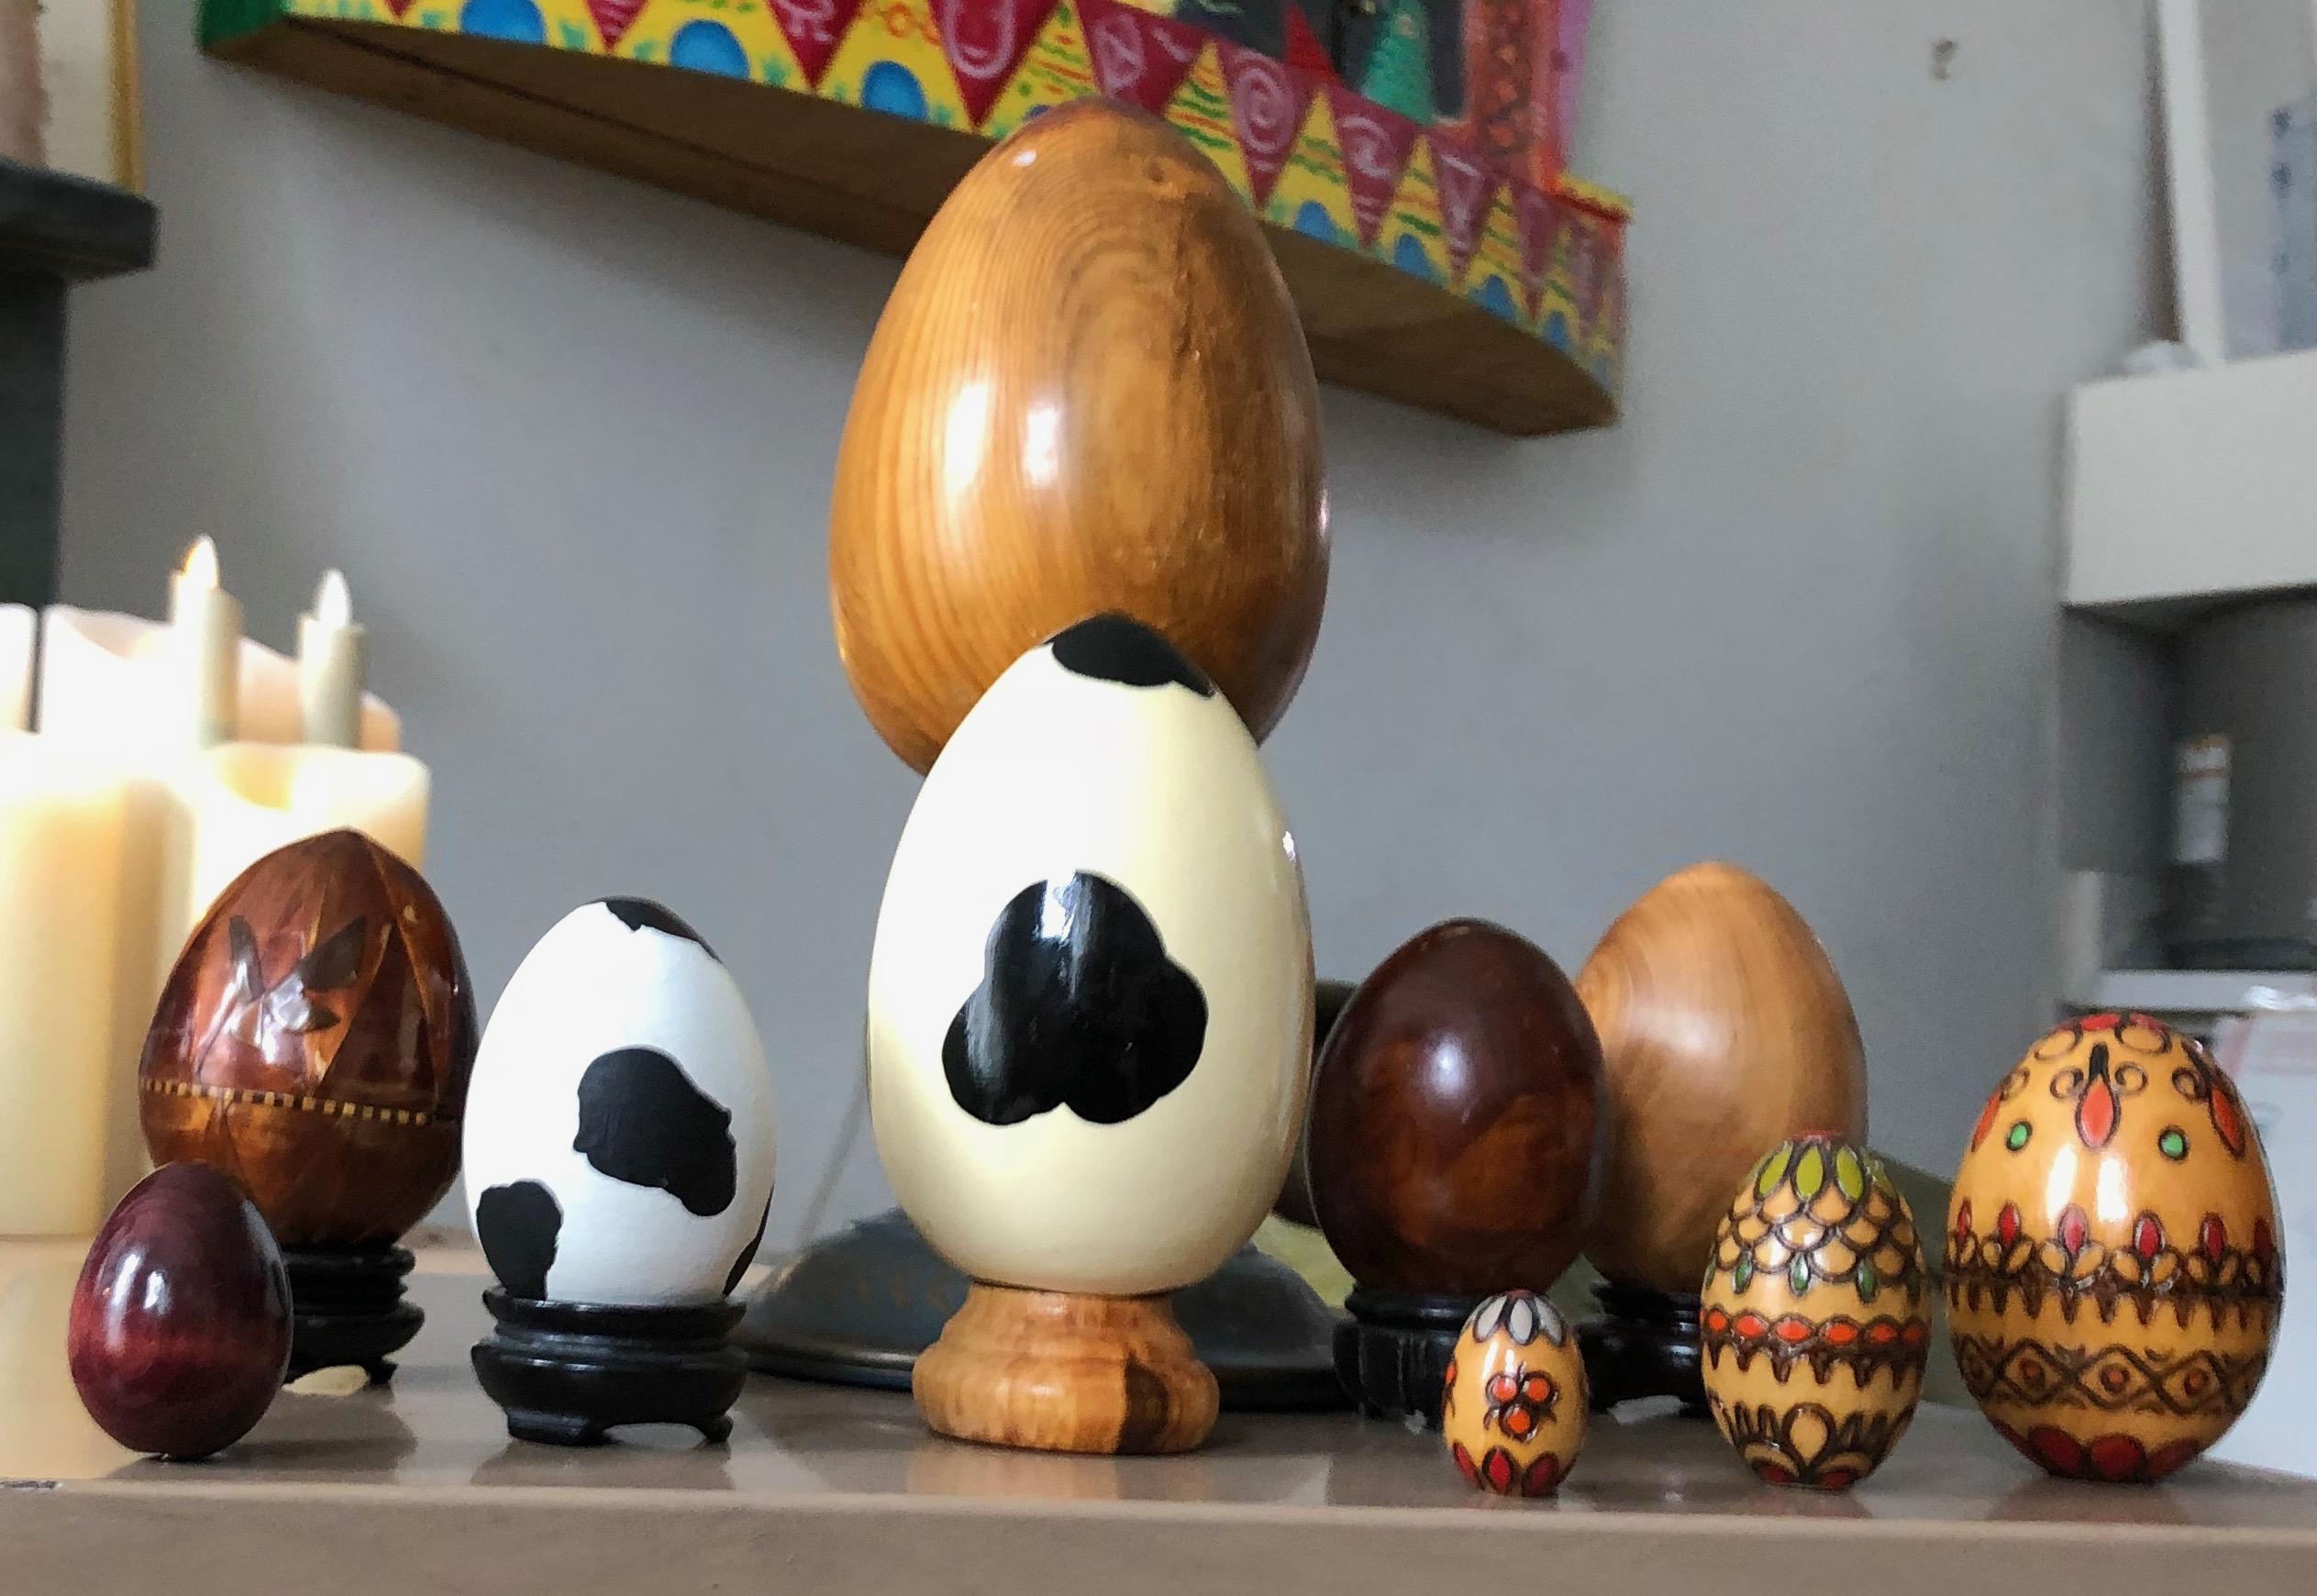 Carefully curated set of decorative wood eggs in the organic modern style. Variety of sizes, see pictures. The three colorful eggs in the front fit inside each other, Russian doll style.
 